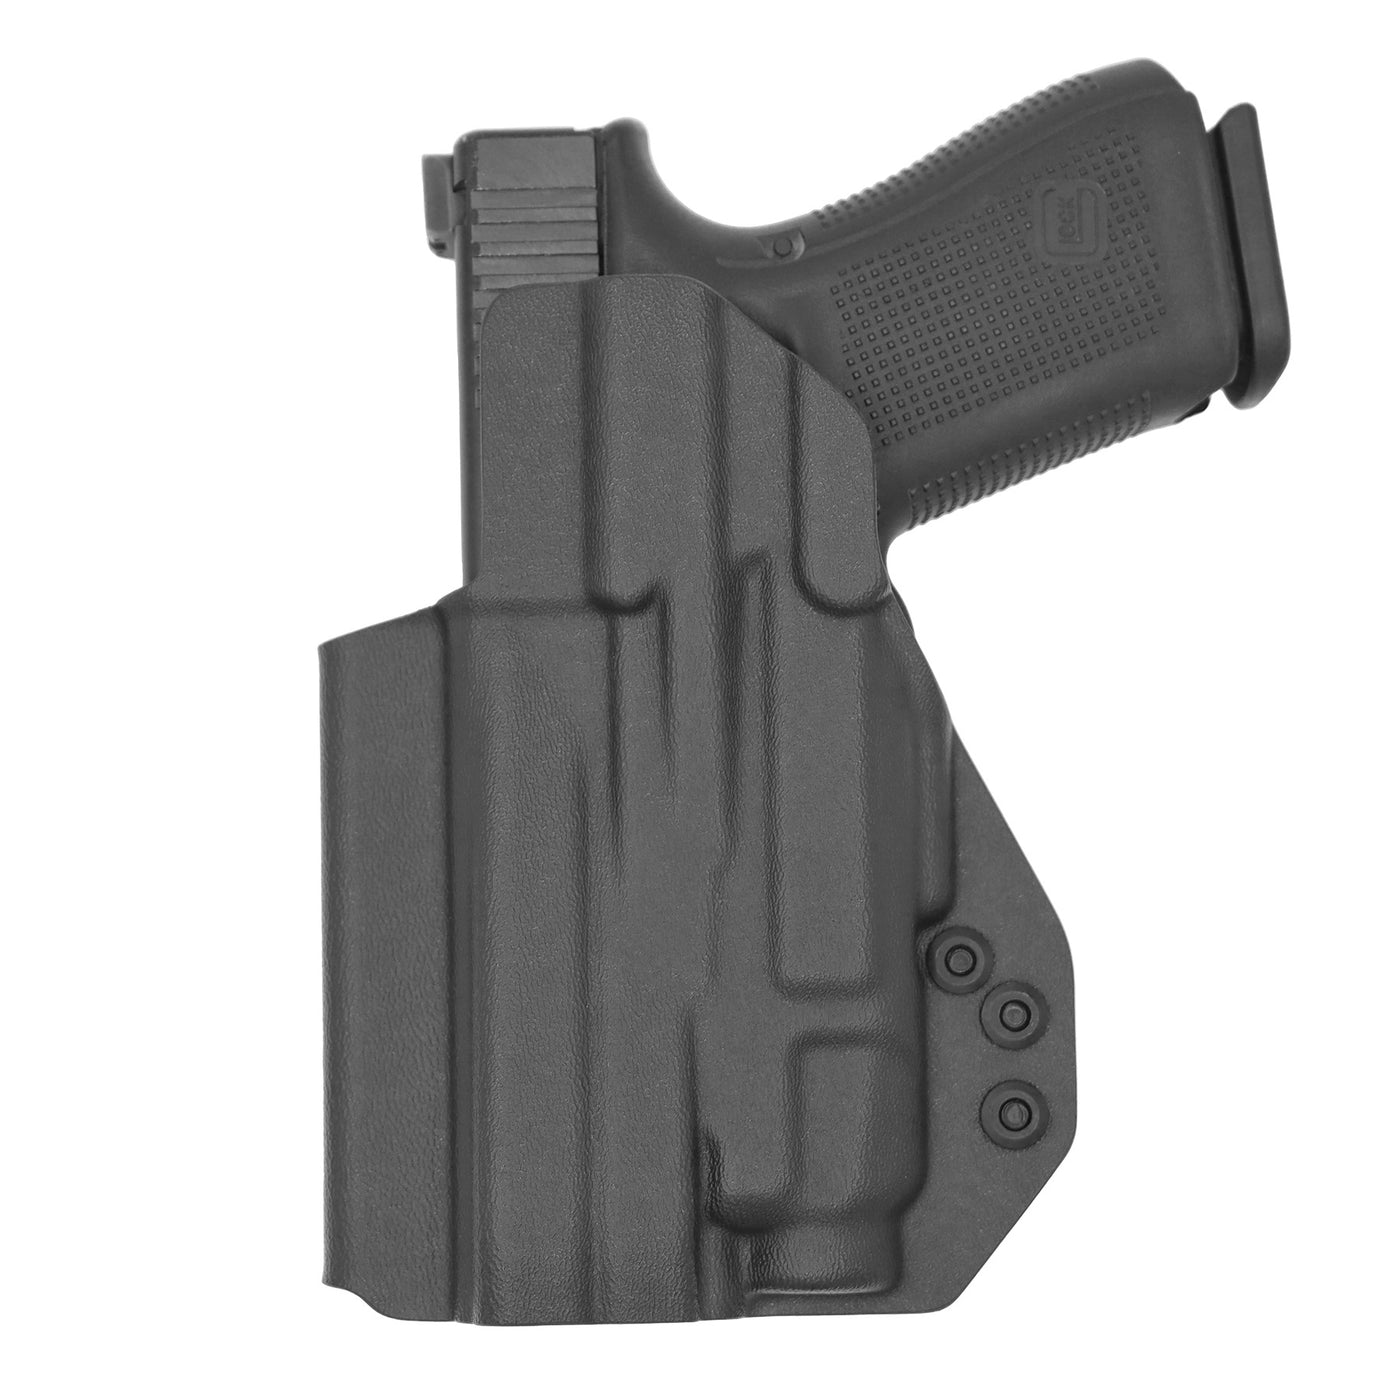 C&G Holsters quickship IWB Tactical CZ p10/c streamlight tlr7/a in holstered position back view